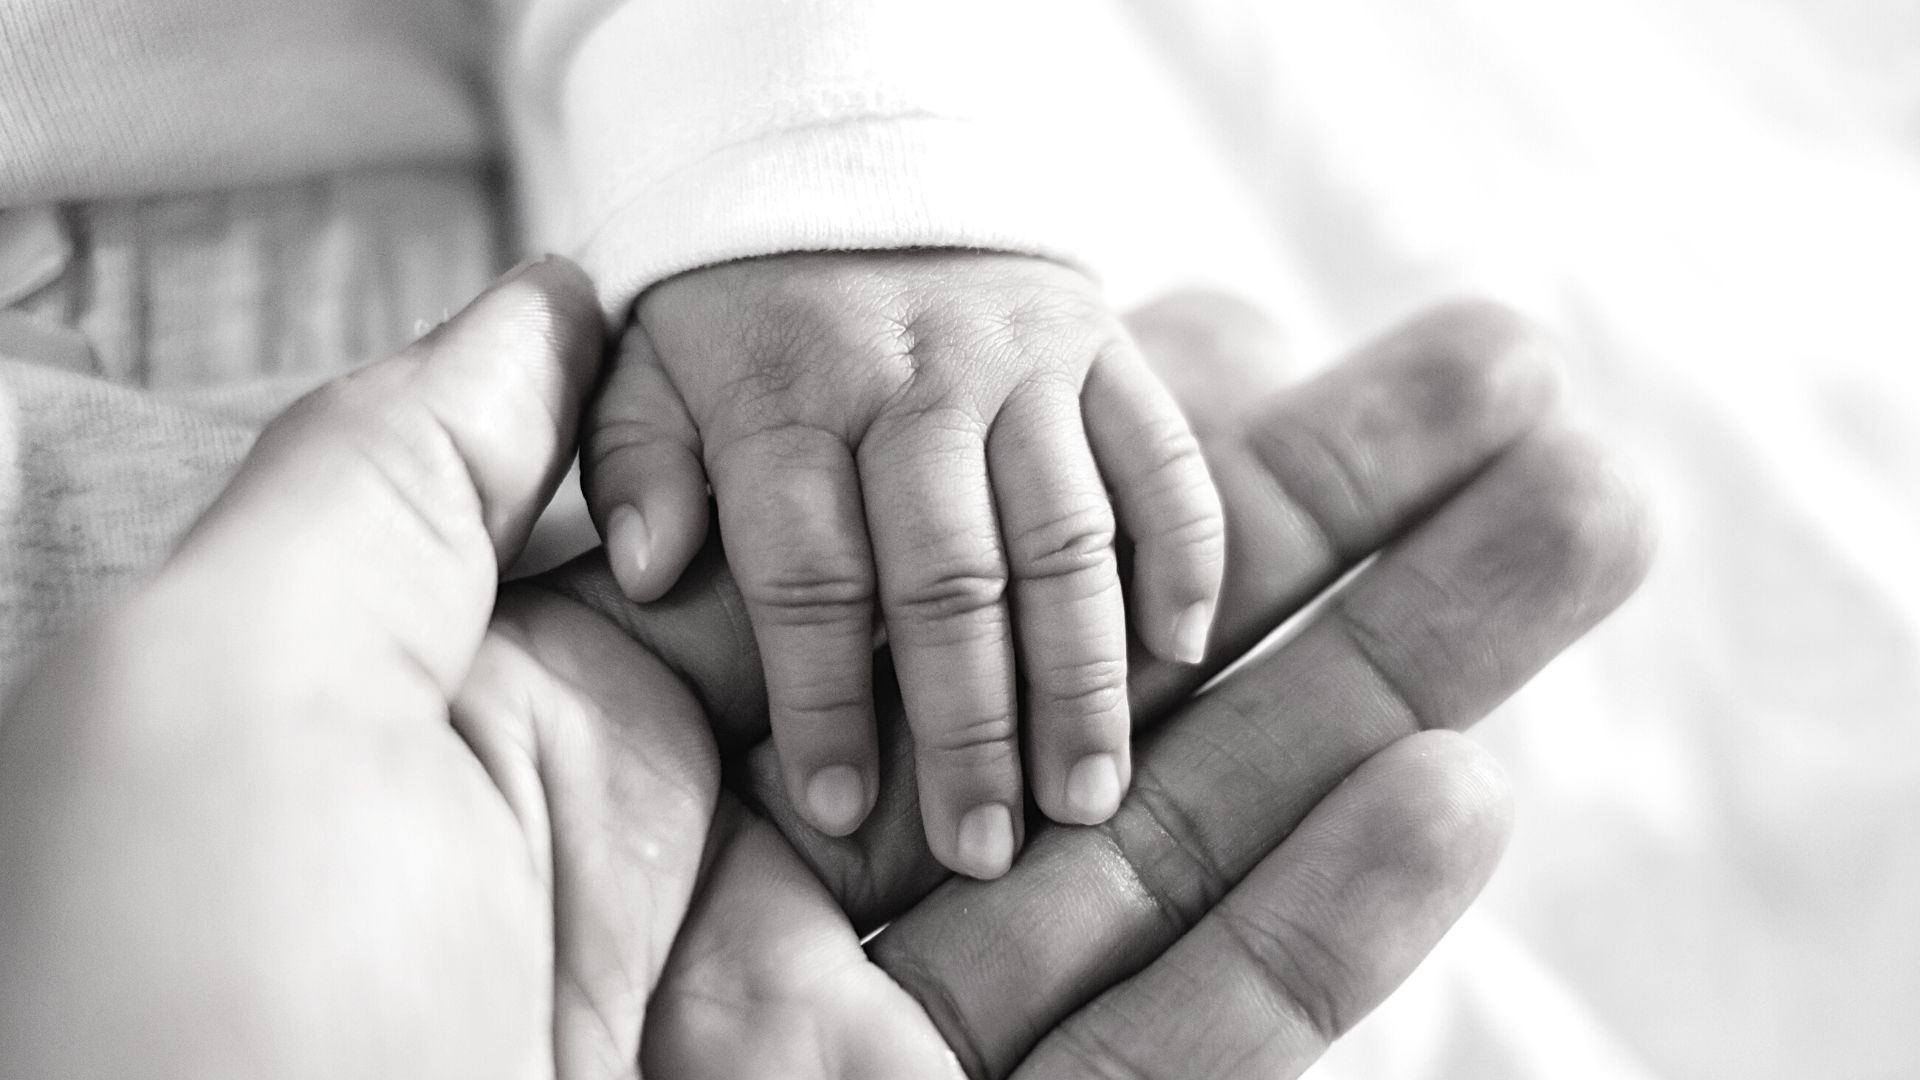 BW photo of an adult hand with palm facing upwards holding an infant's hand